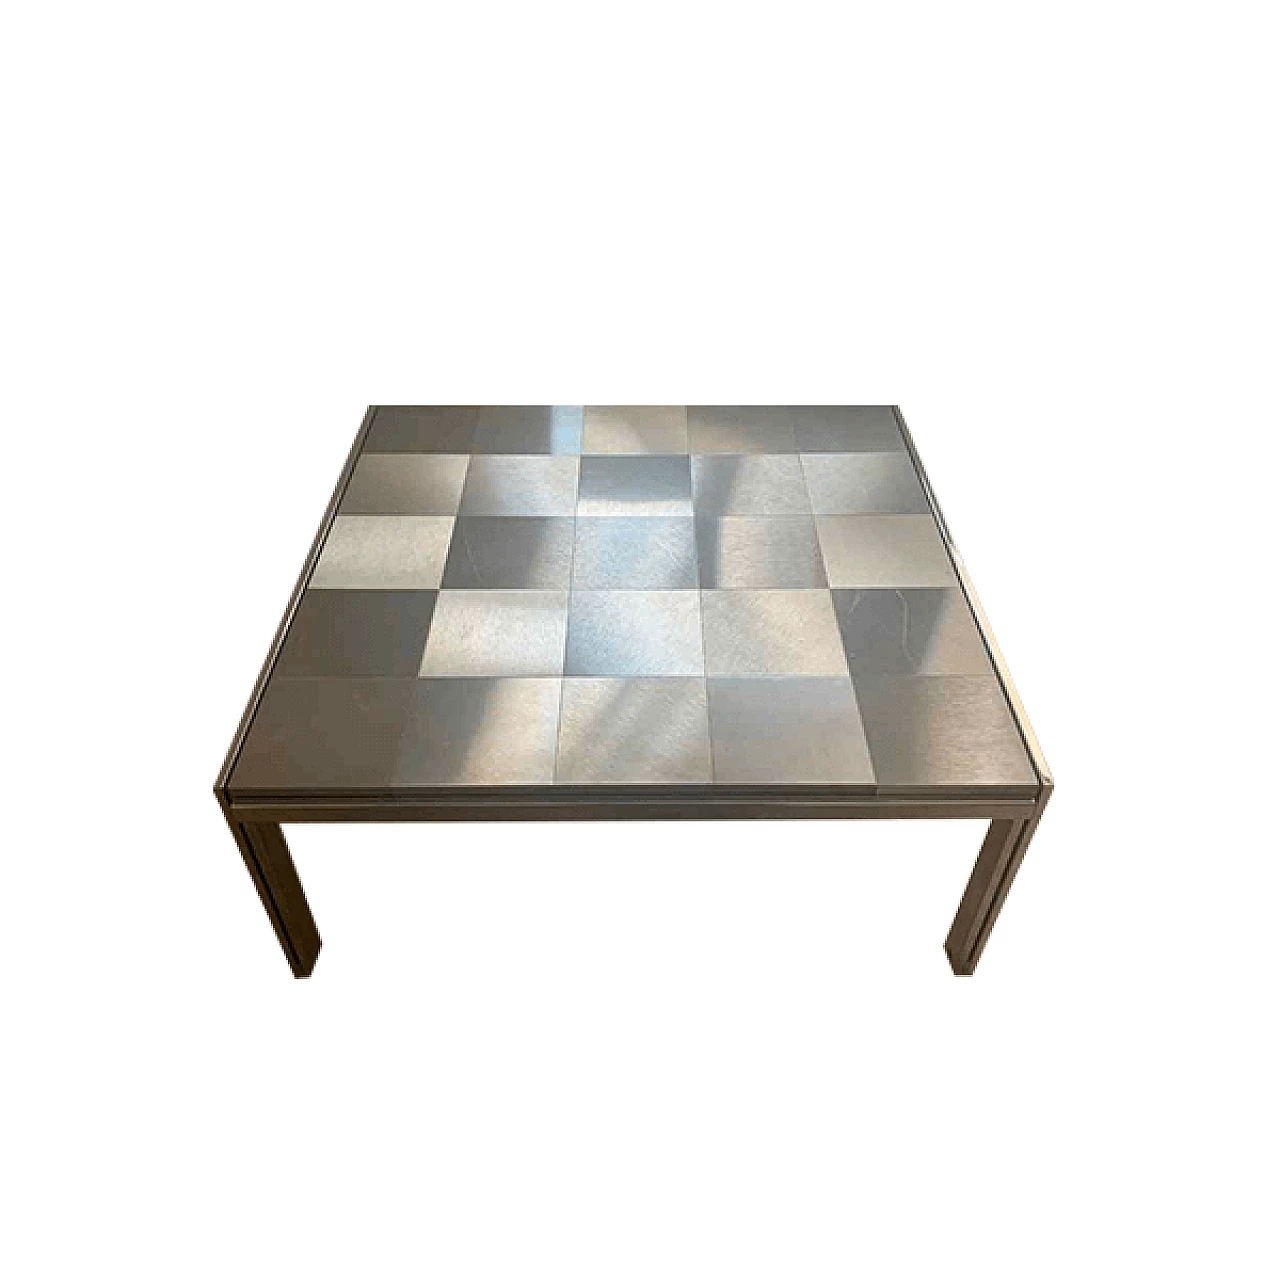 Steel coffee table by Ross Littell for ICF DePadova, 1970s 1456142